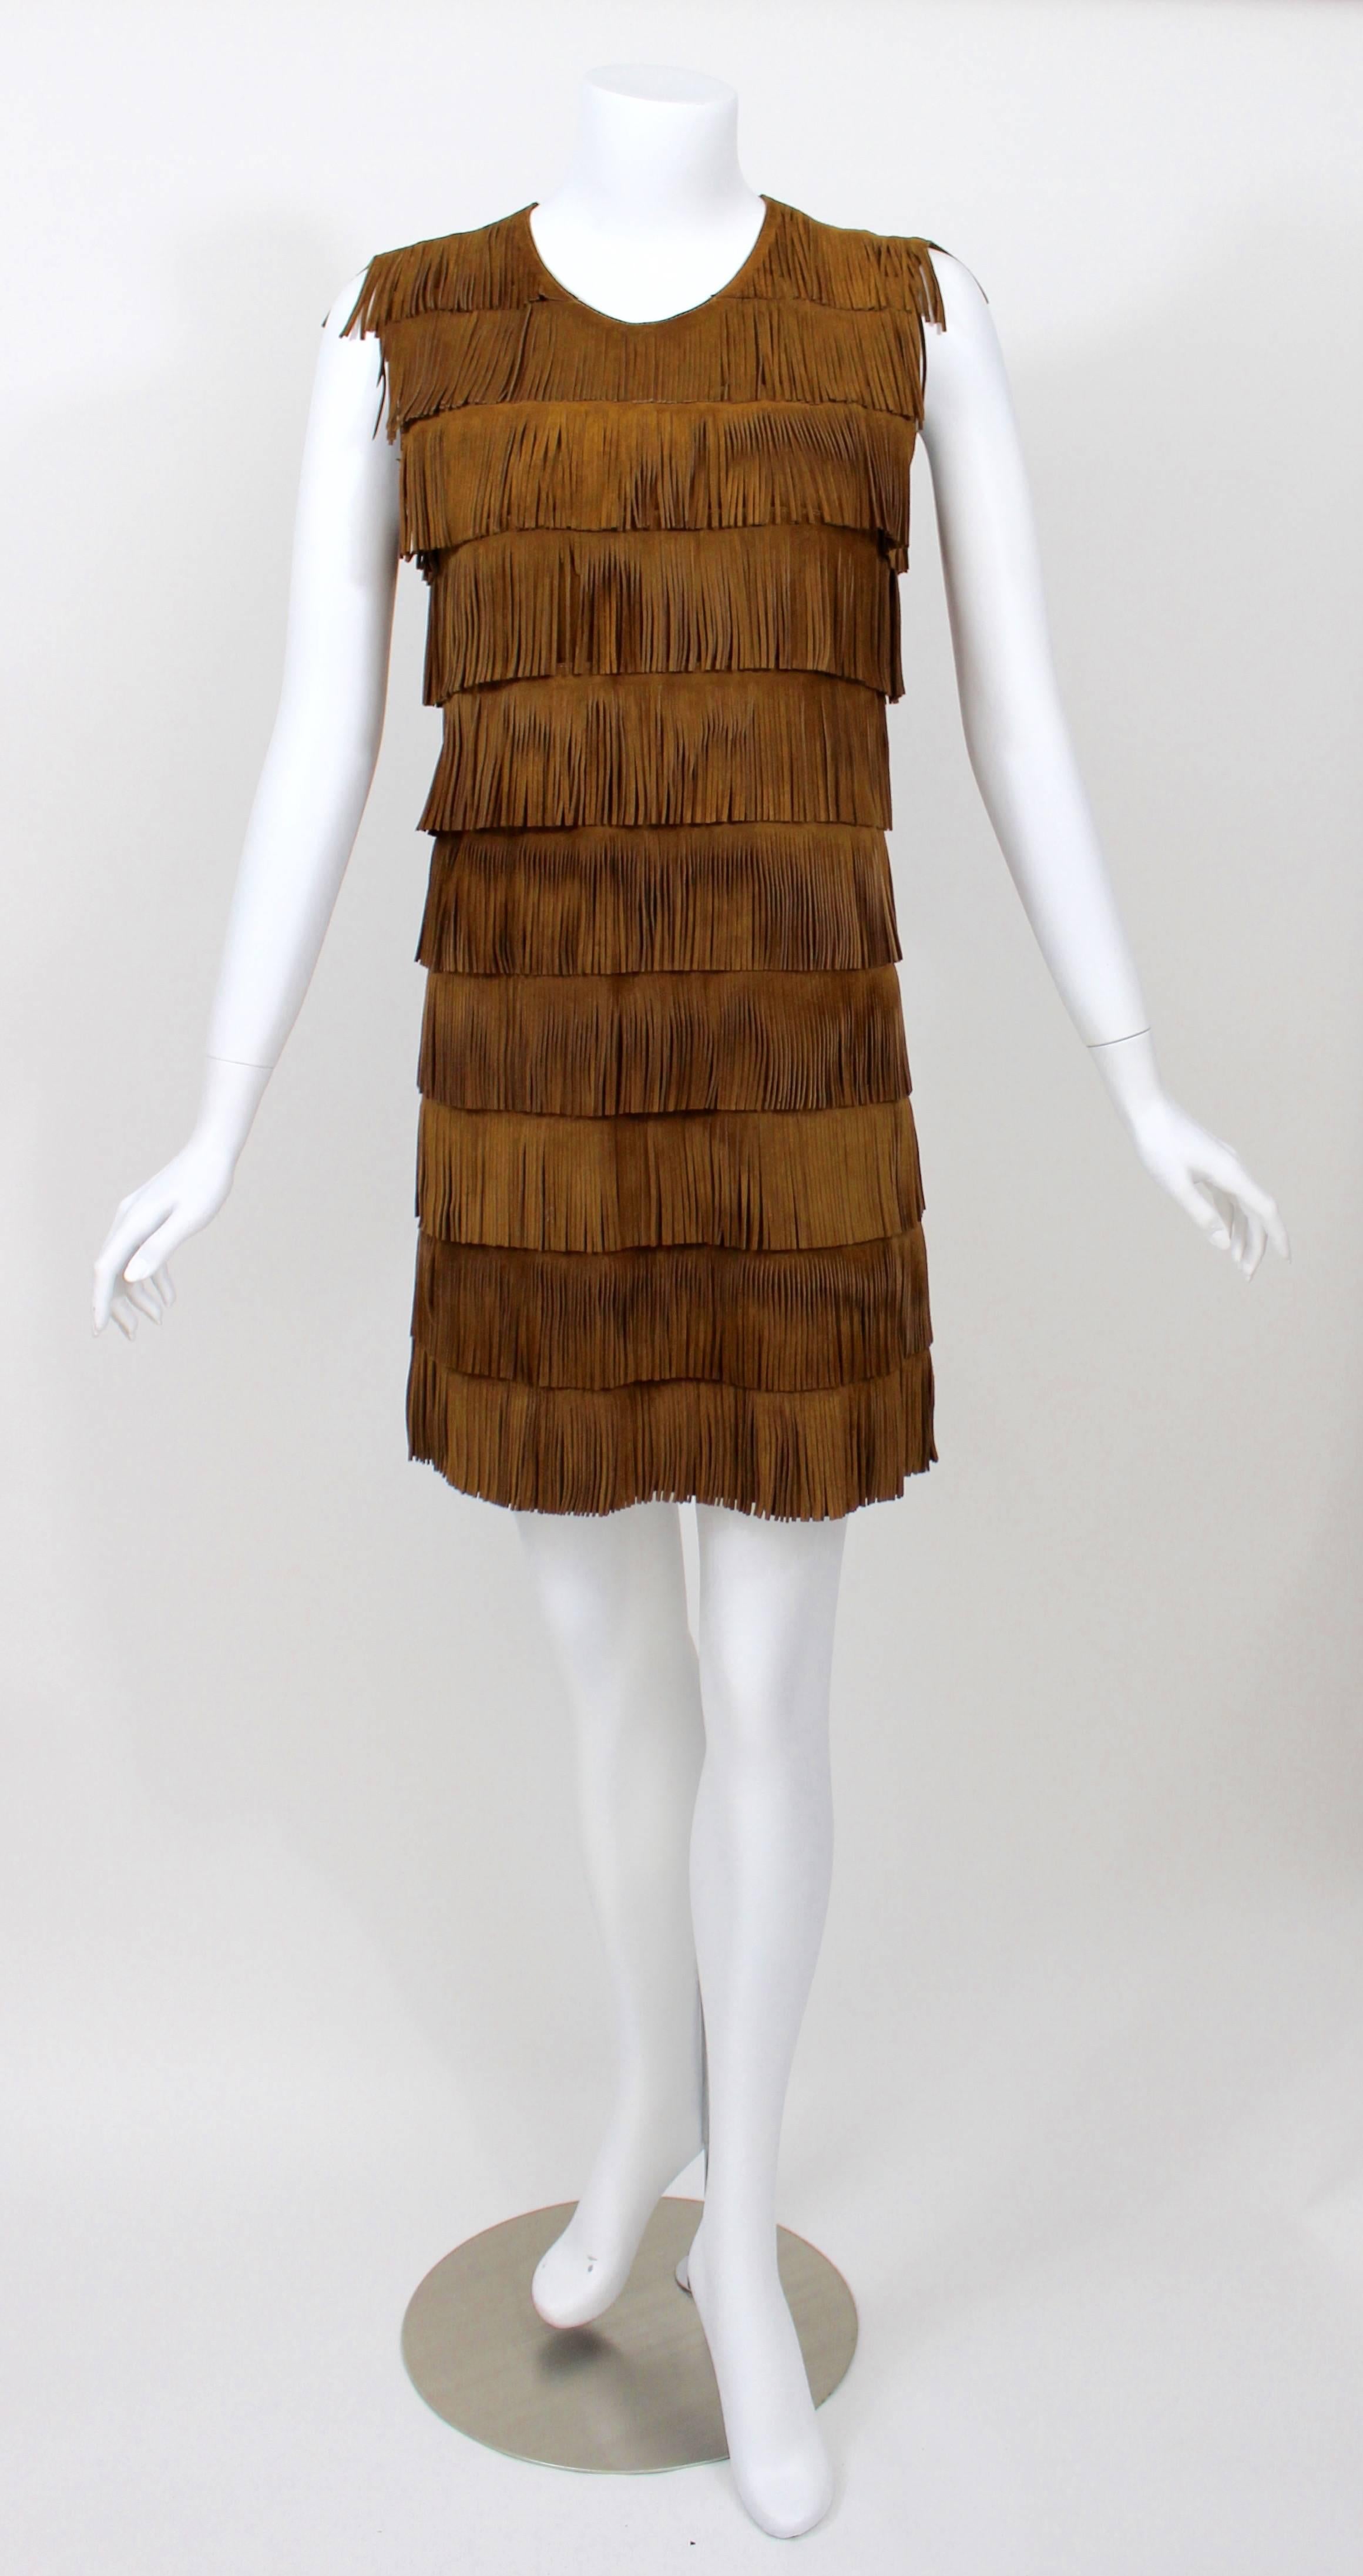 A Prada brown suede fringe shift dress.

Measurements:
Bust: 32 inches
Waist: 30 inches
hips: 34 inches
Length: 34 inches.
